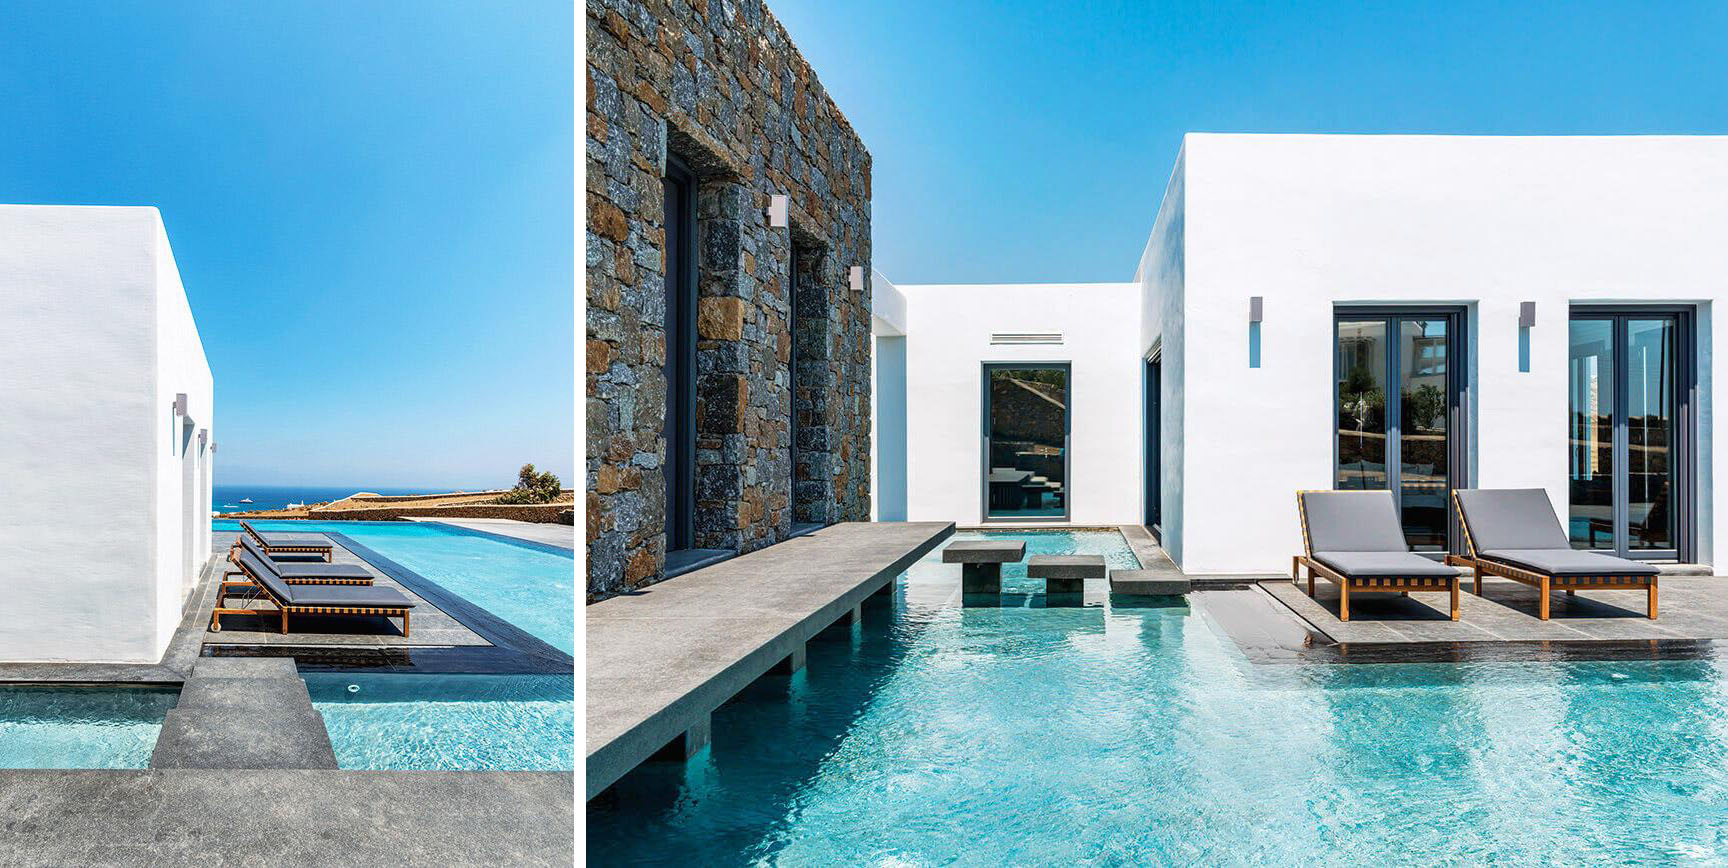 The white cube by People is a gorgeous display of a modern backyard of Greece. #backyard inspiration via www.L-2-Design.com